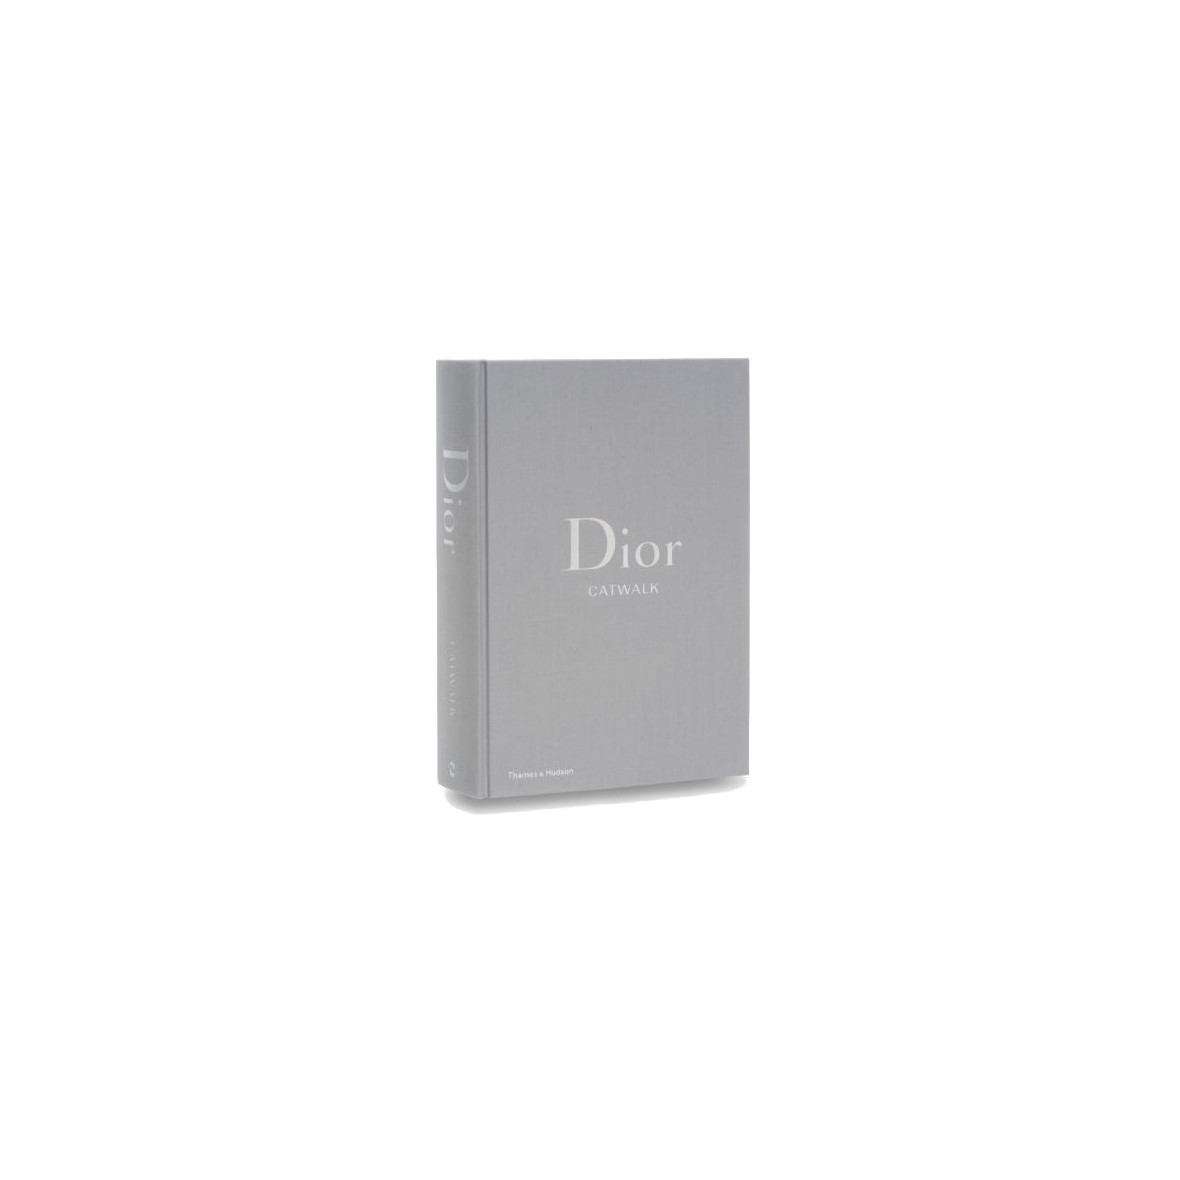 ASIA PUBLISHERS SERVICES  Dior Catwalk The Complete Collections  Women   Lane Crawford